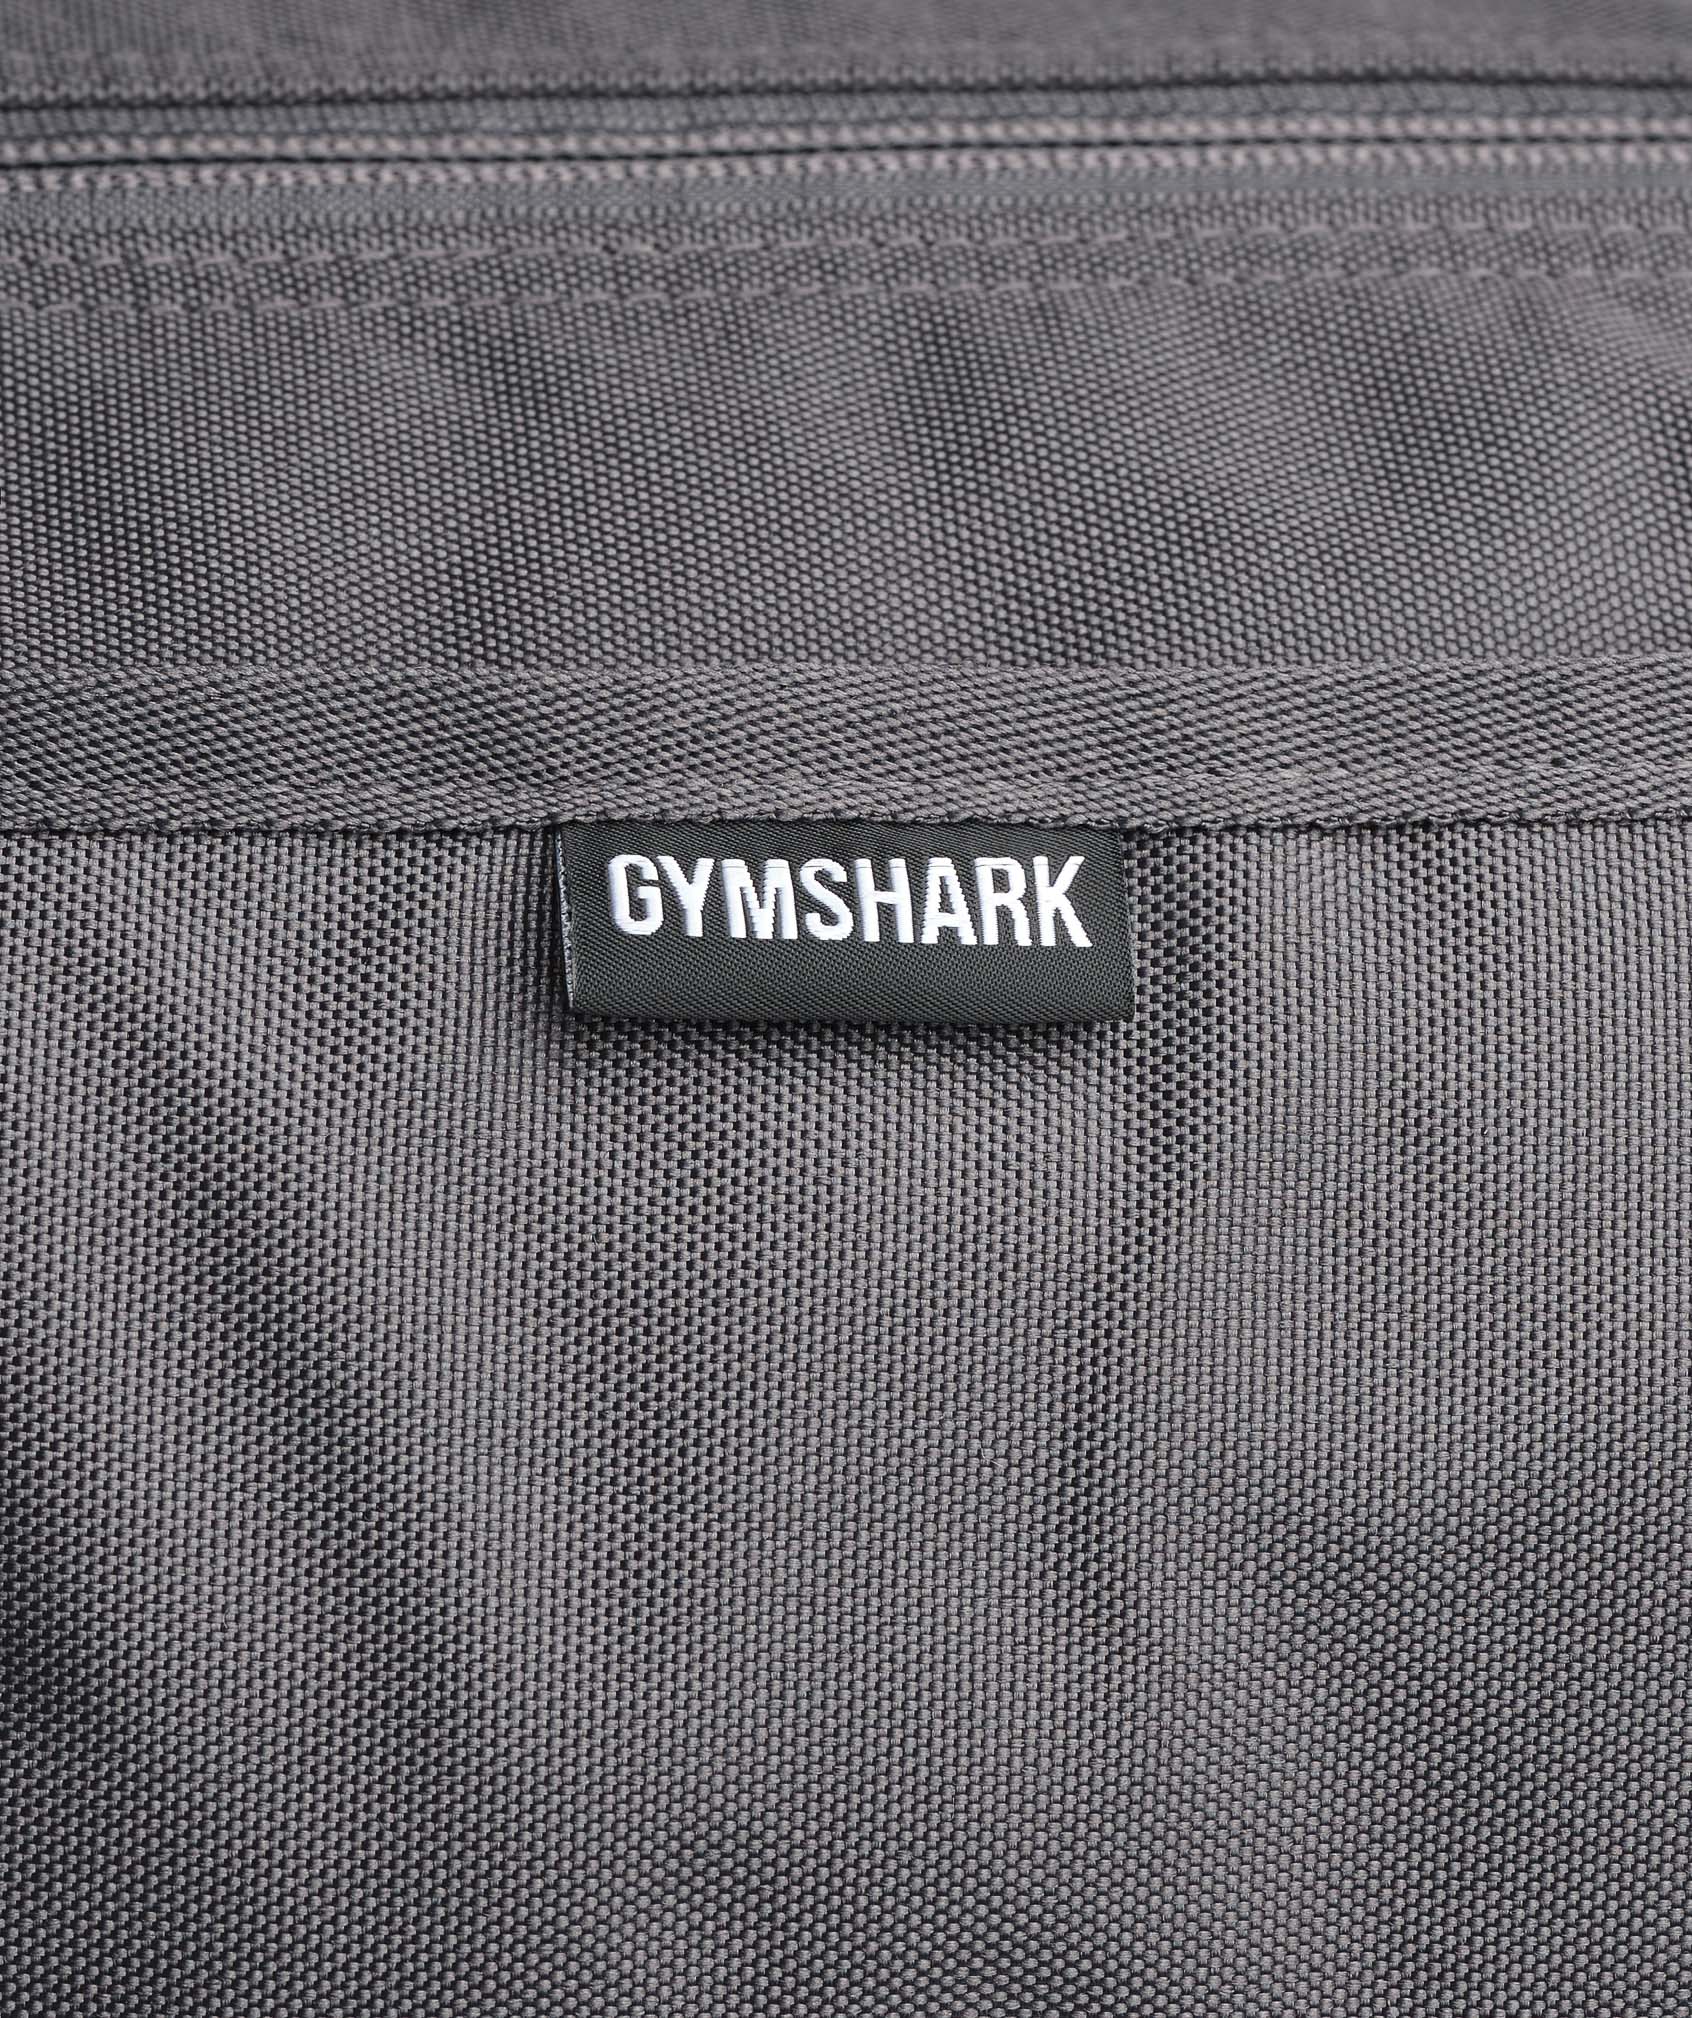 Sharkhead Gym Bag in Graphite Grey - view 3